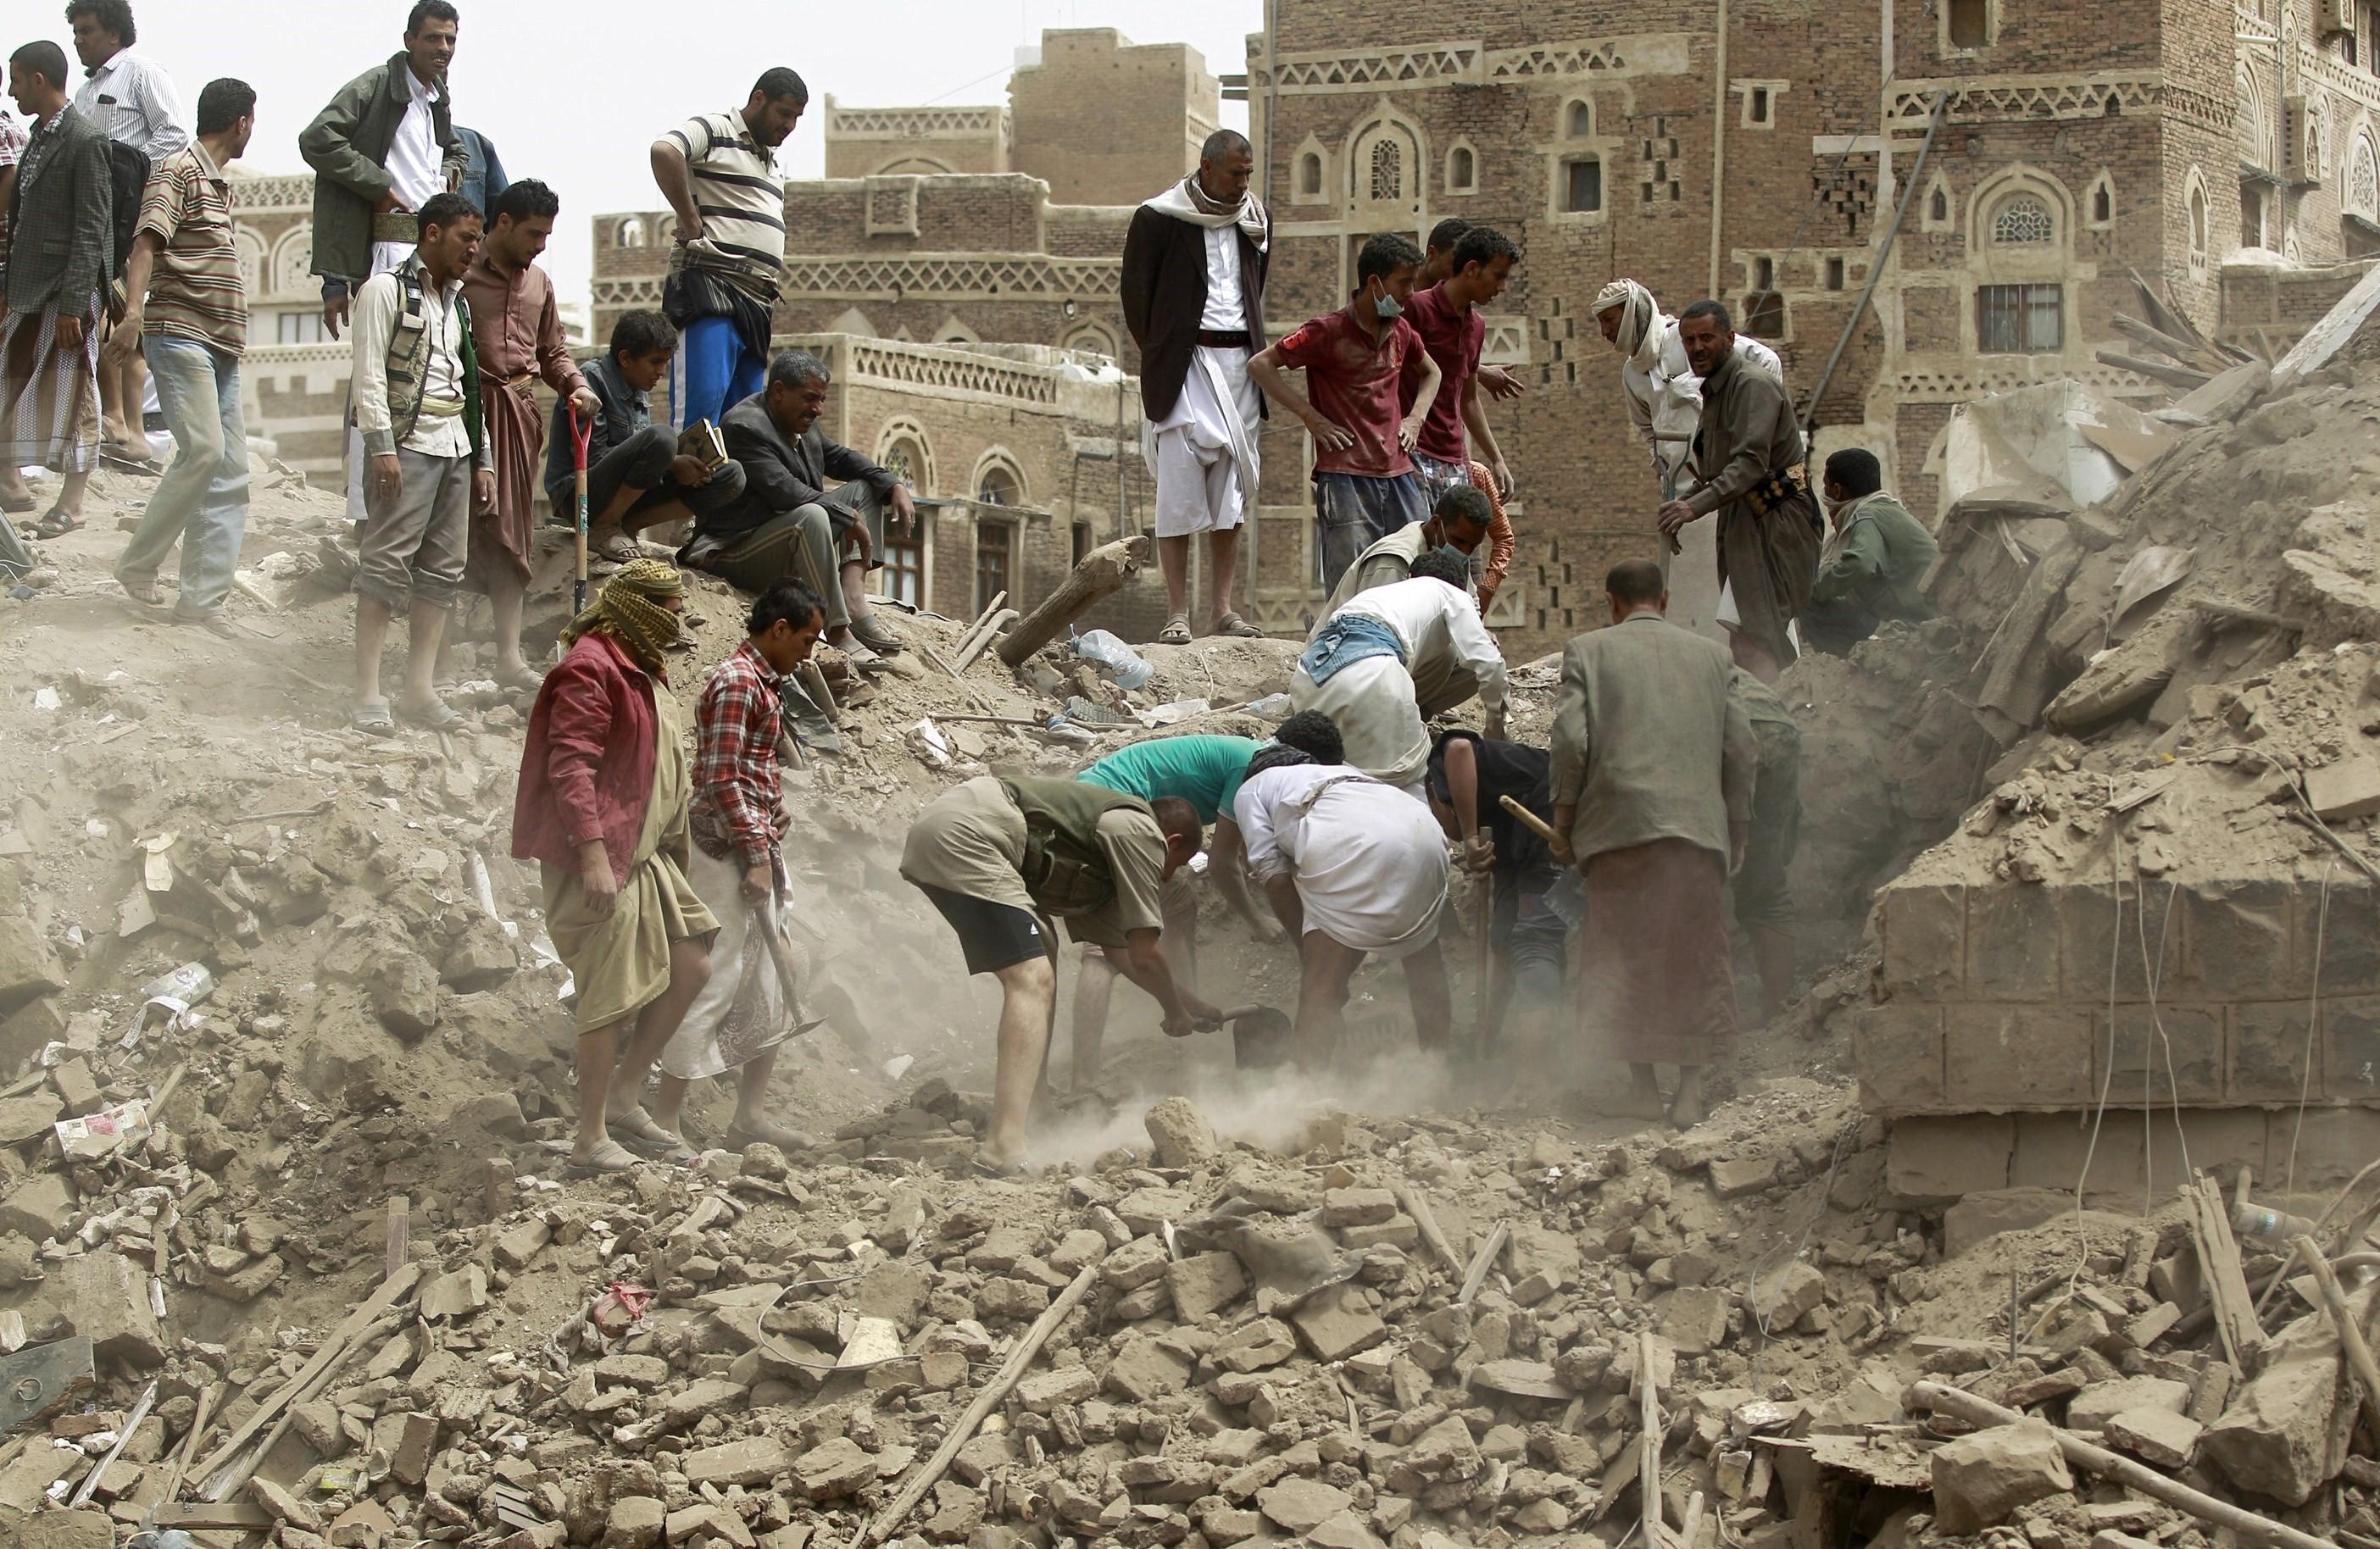 Yemenis search for survivors under the rubble of houses in the UNESCO-listed heritage site in the old city of Yemeni capital Sanaa, on June 12, 2015 following an overnight Saudi-led air strike. Residents said the pre-dawn strike was the first direct hit on old Sanaa since the launch of the bombing campaign against Shiite Huthi rebels in late March. AFP PHOTO / MOHAMMED HUWAIS